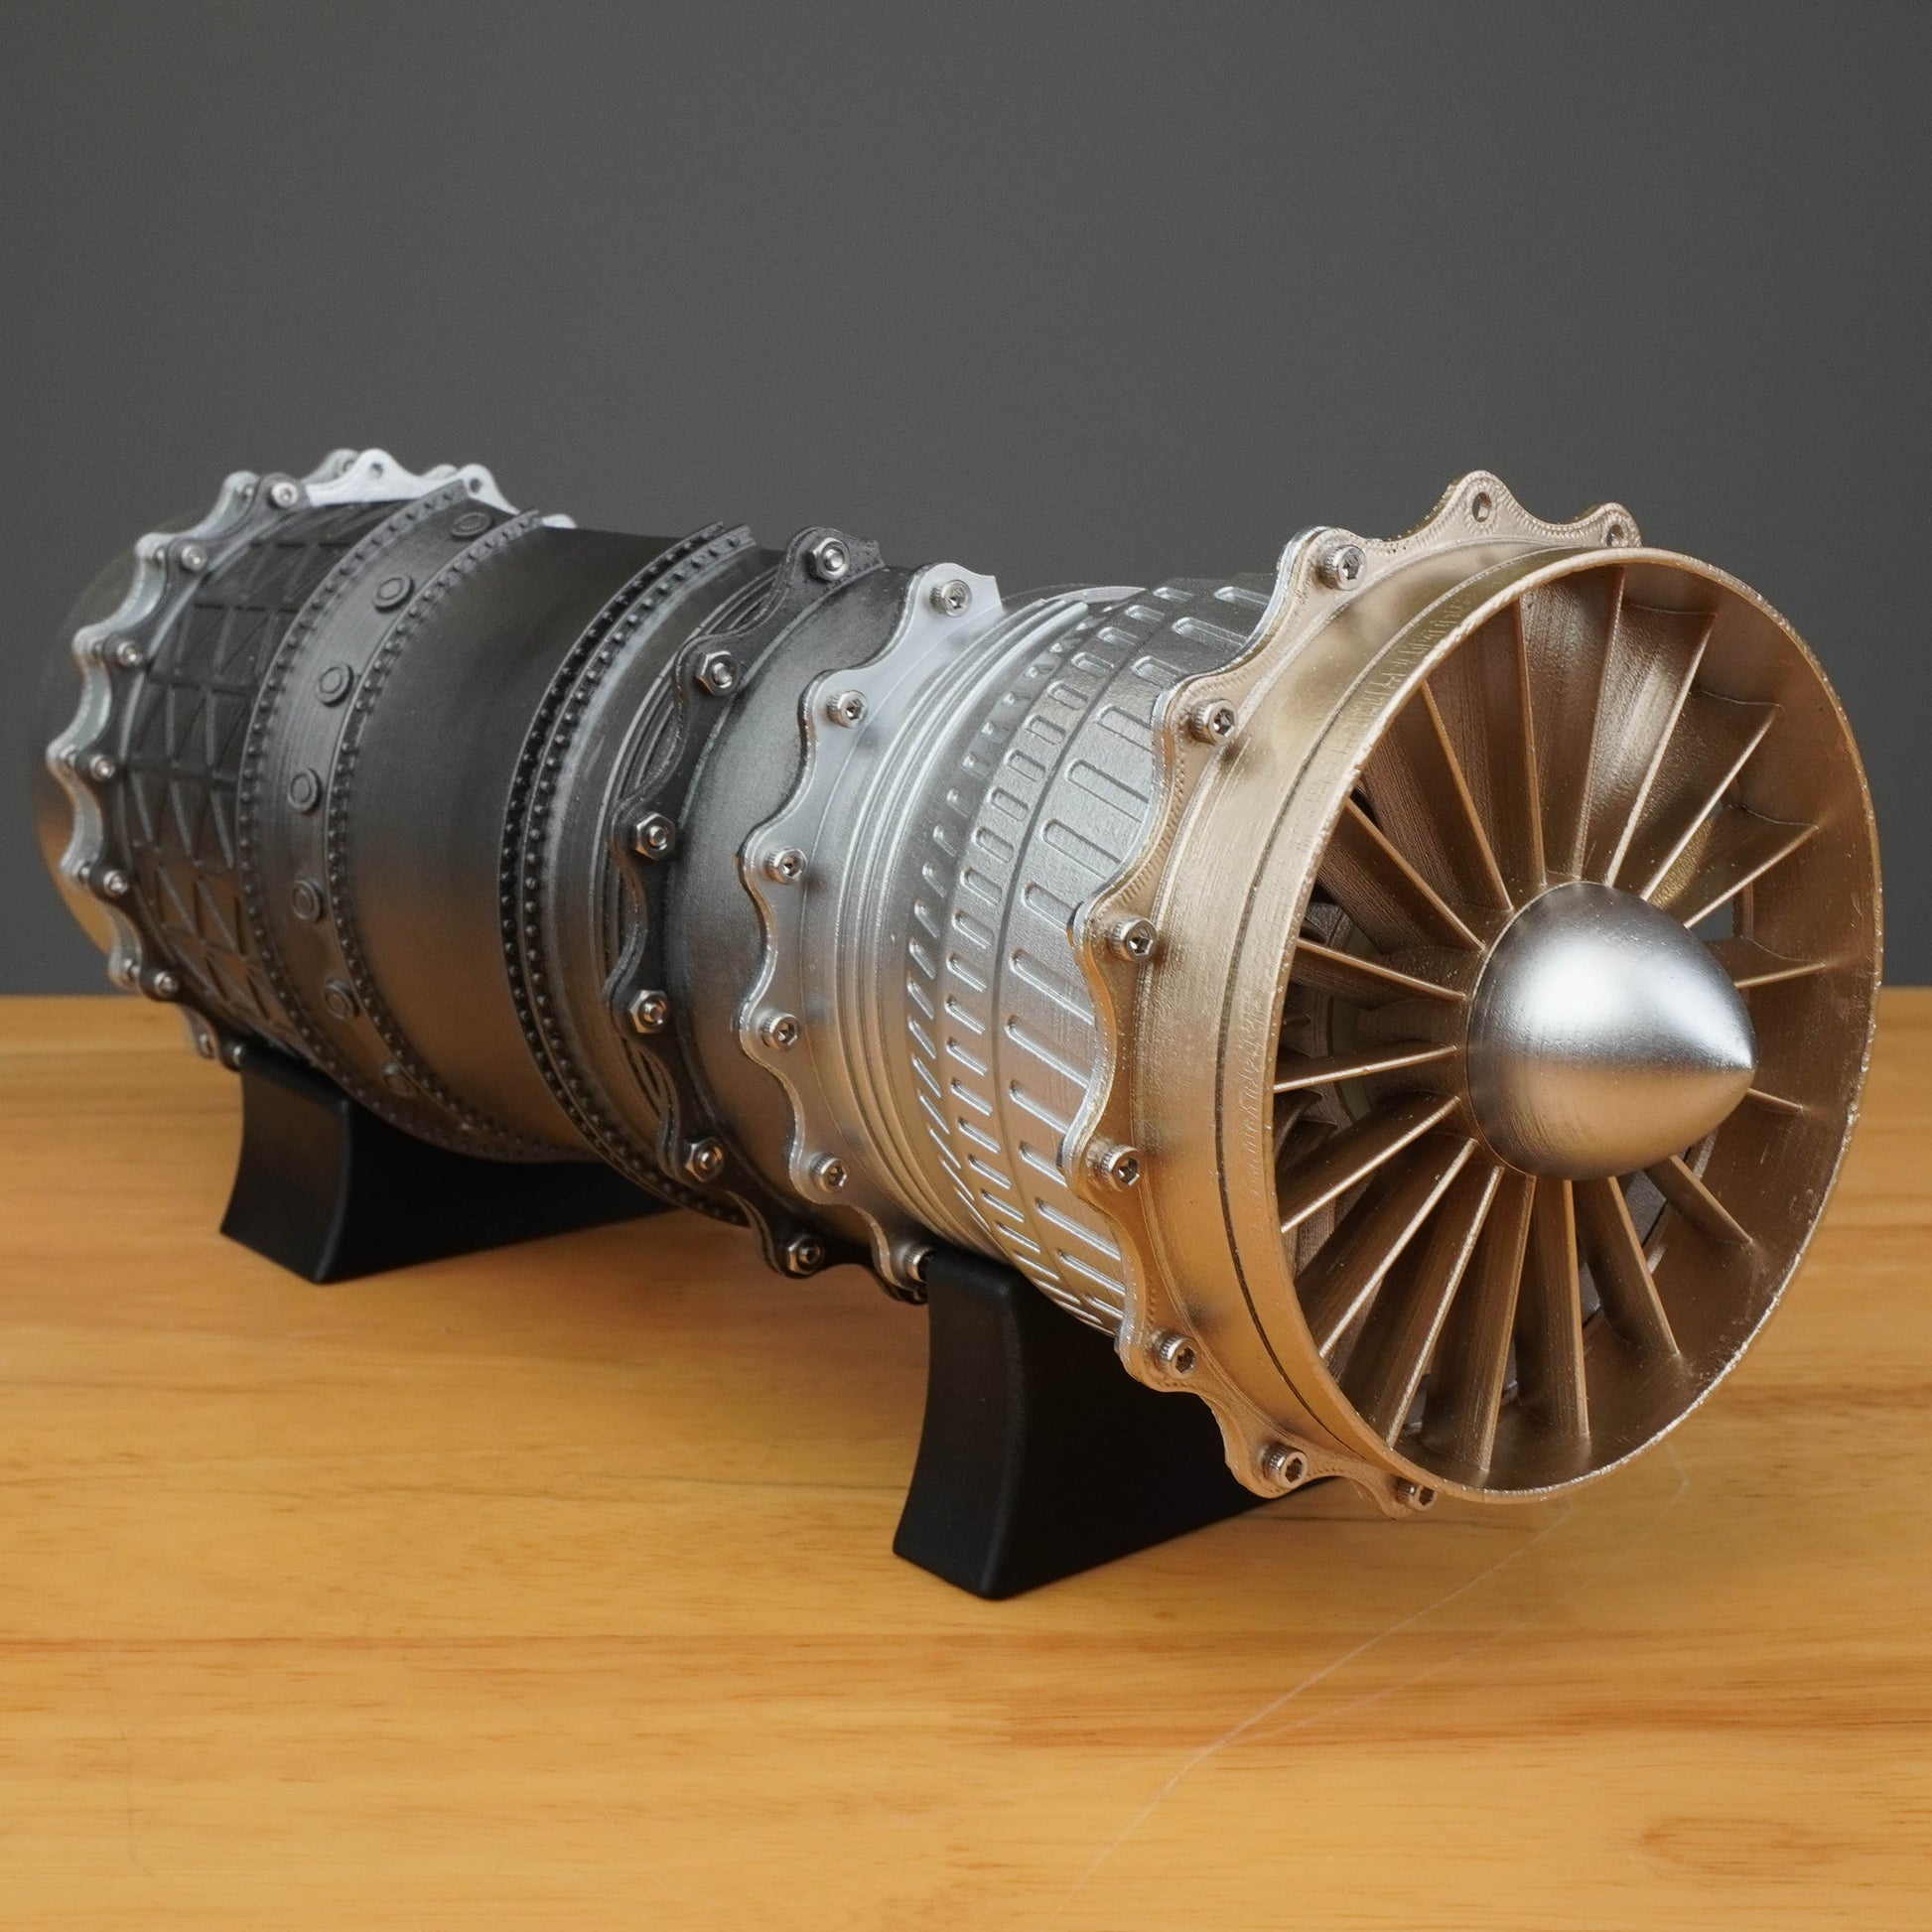 Aircraft Turbofan Frighter Engine Model Kit That Works, 1/20 WS-15 Metal  Engine Kit DIY Assembly Engine Technology Science Physical Experiment Toys